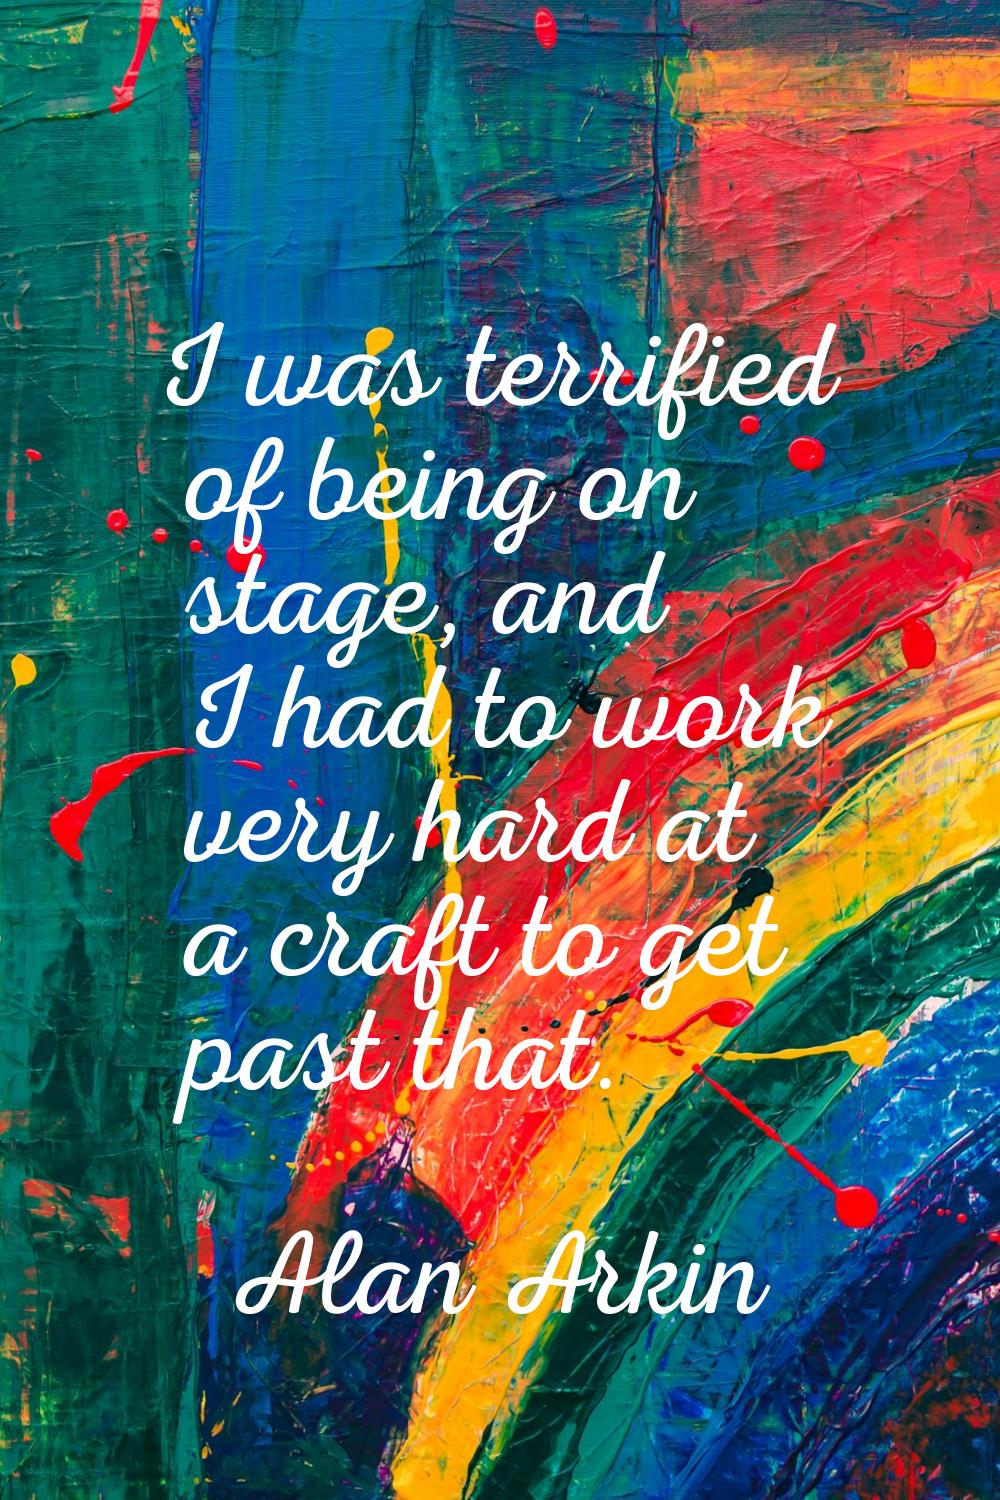 I was terrified of being on stage, and I had to work very hard at a craft to get past that.